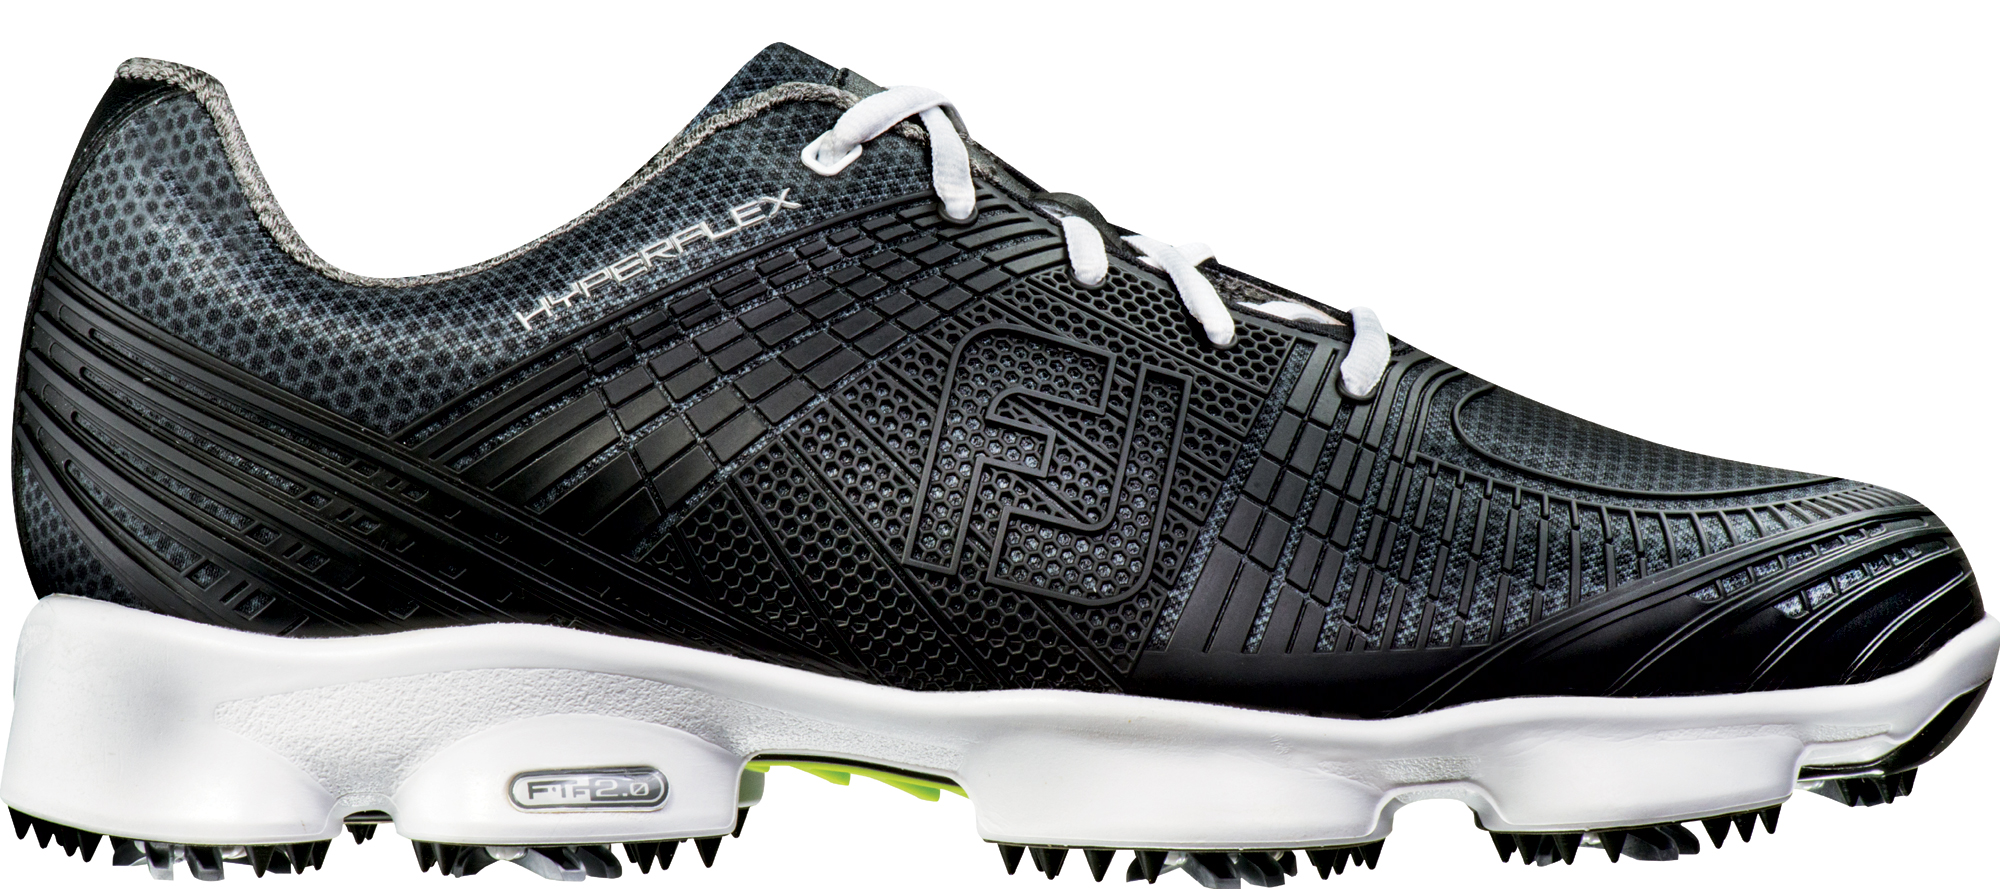 7 awesome Black Friday deals when it comes to golf shoes...